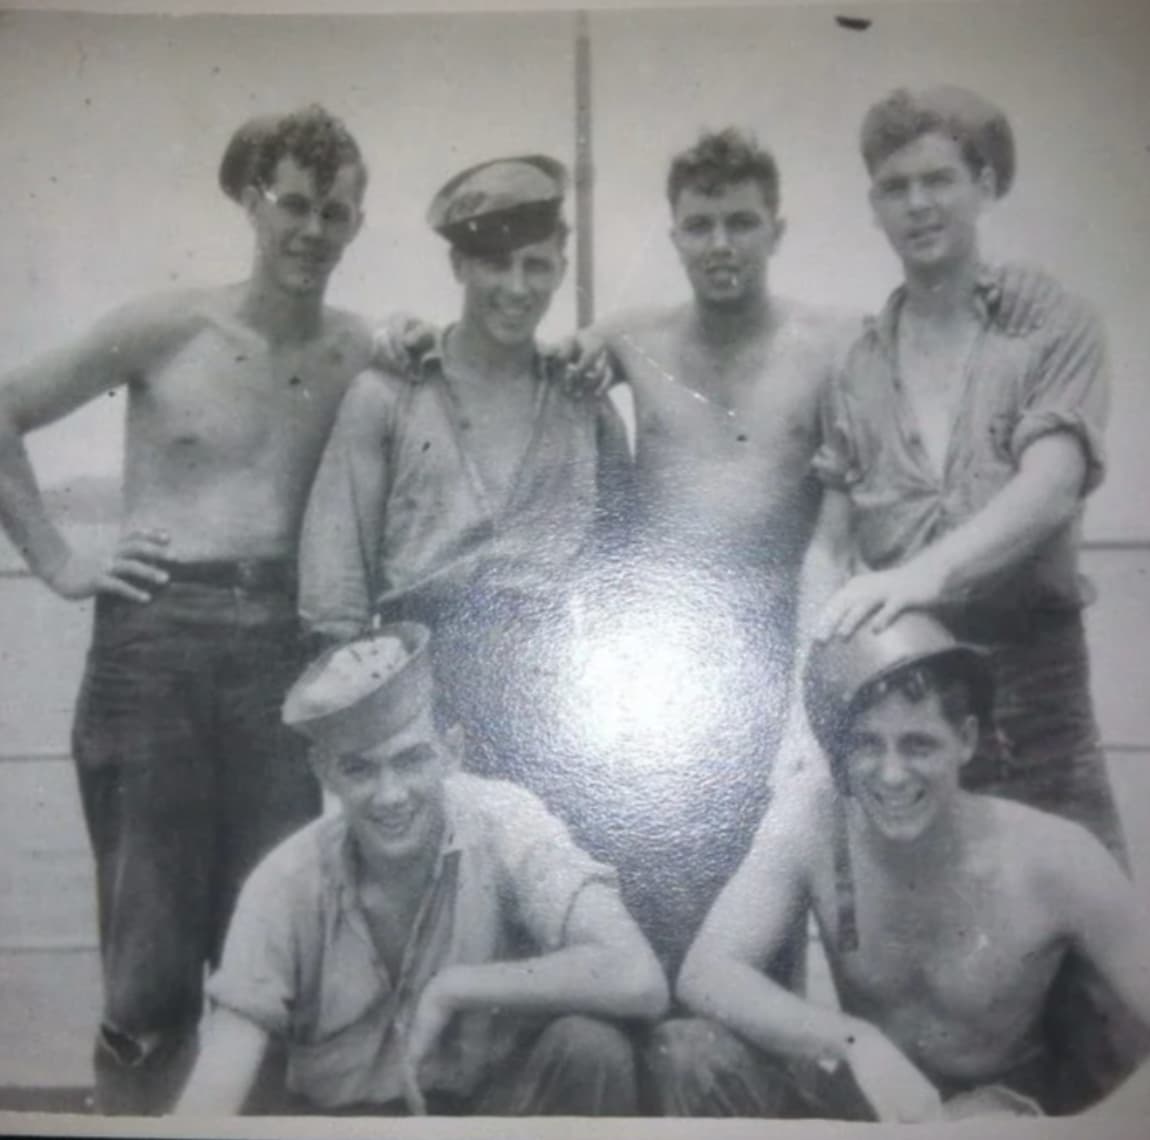 “My Dad 1940s (Lower Right with the Helmet On).” 